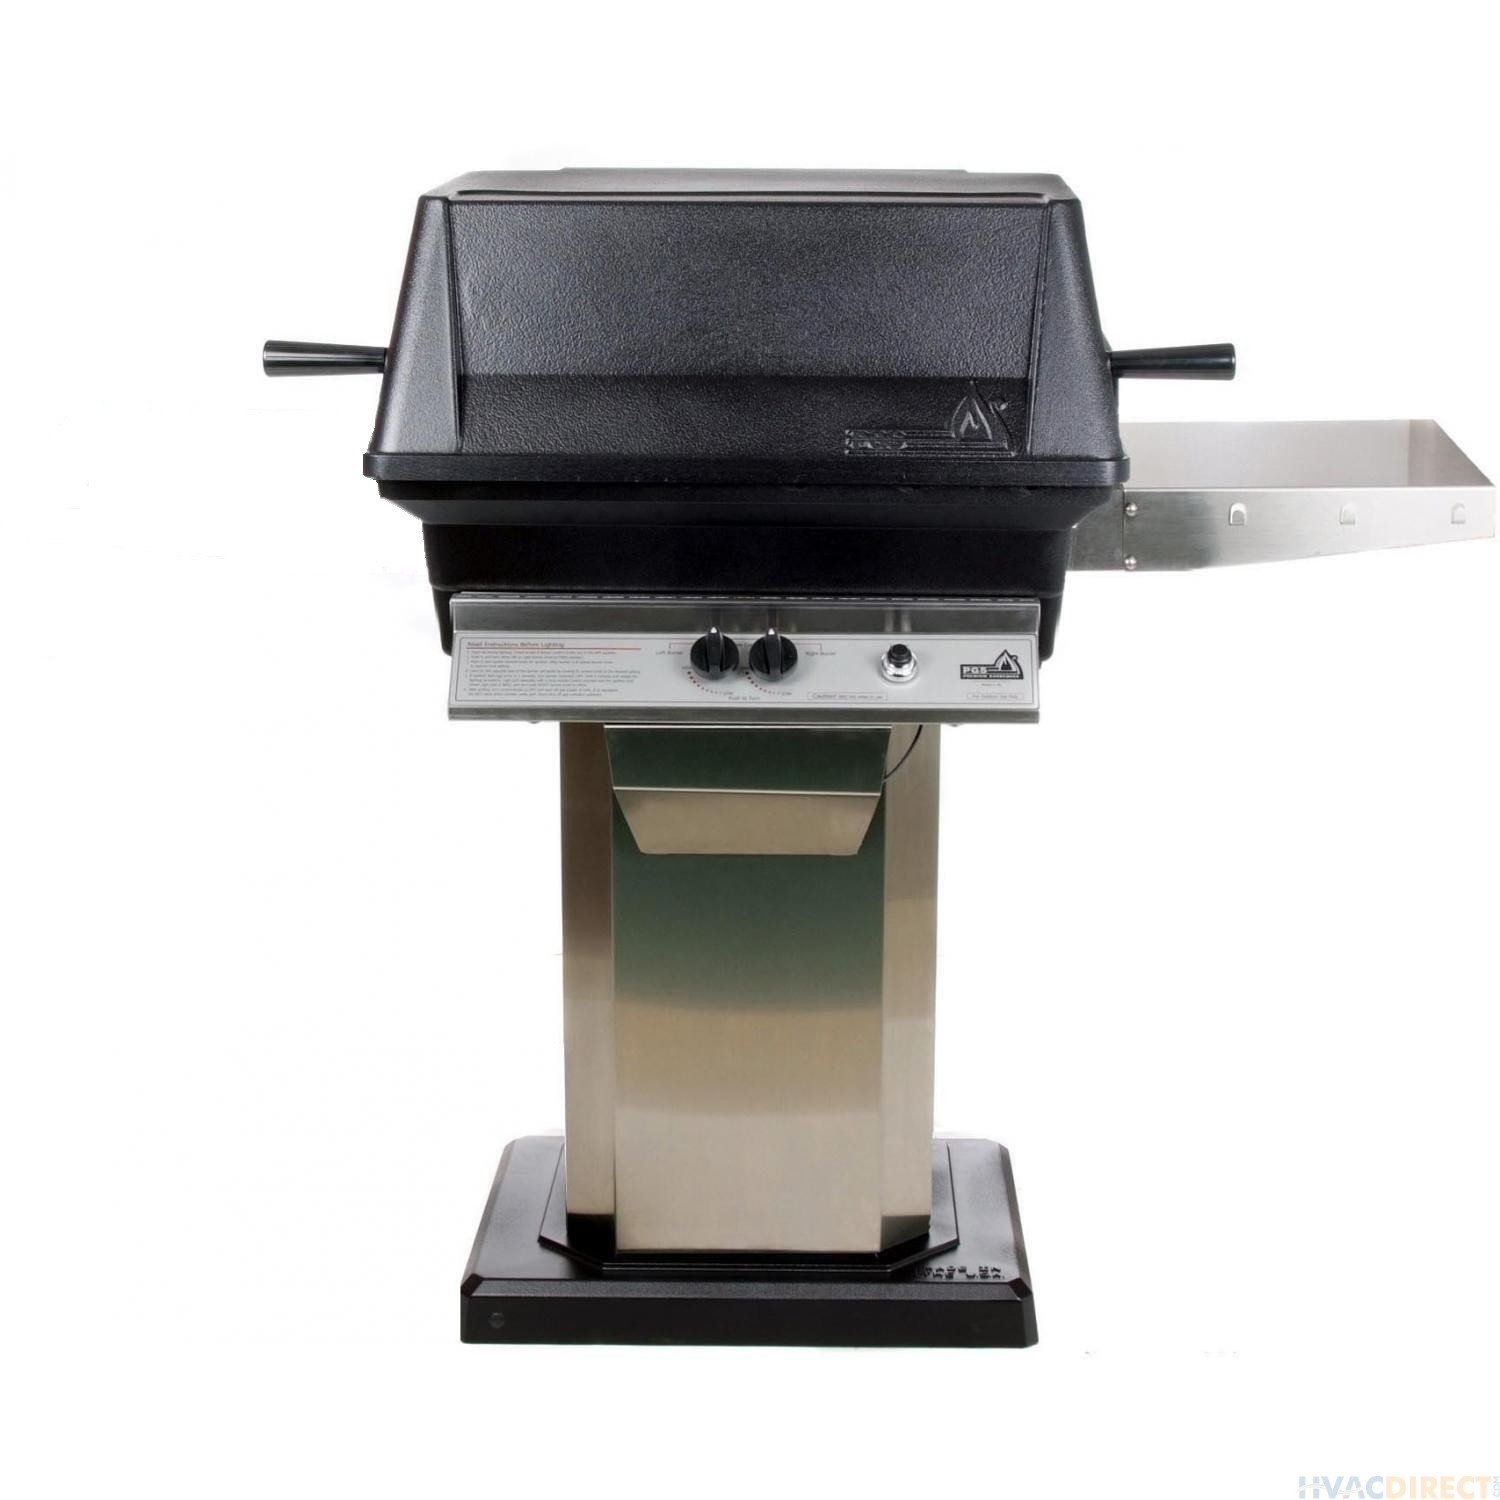 PGS Grills A-Series Built-In Grill - 30,000 BTU